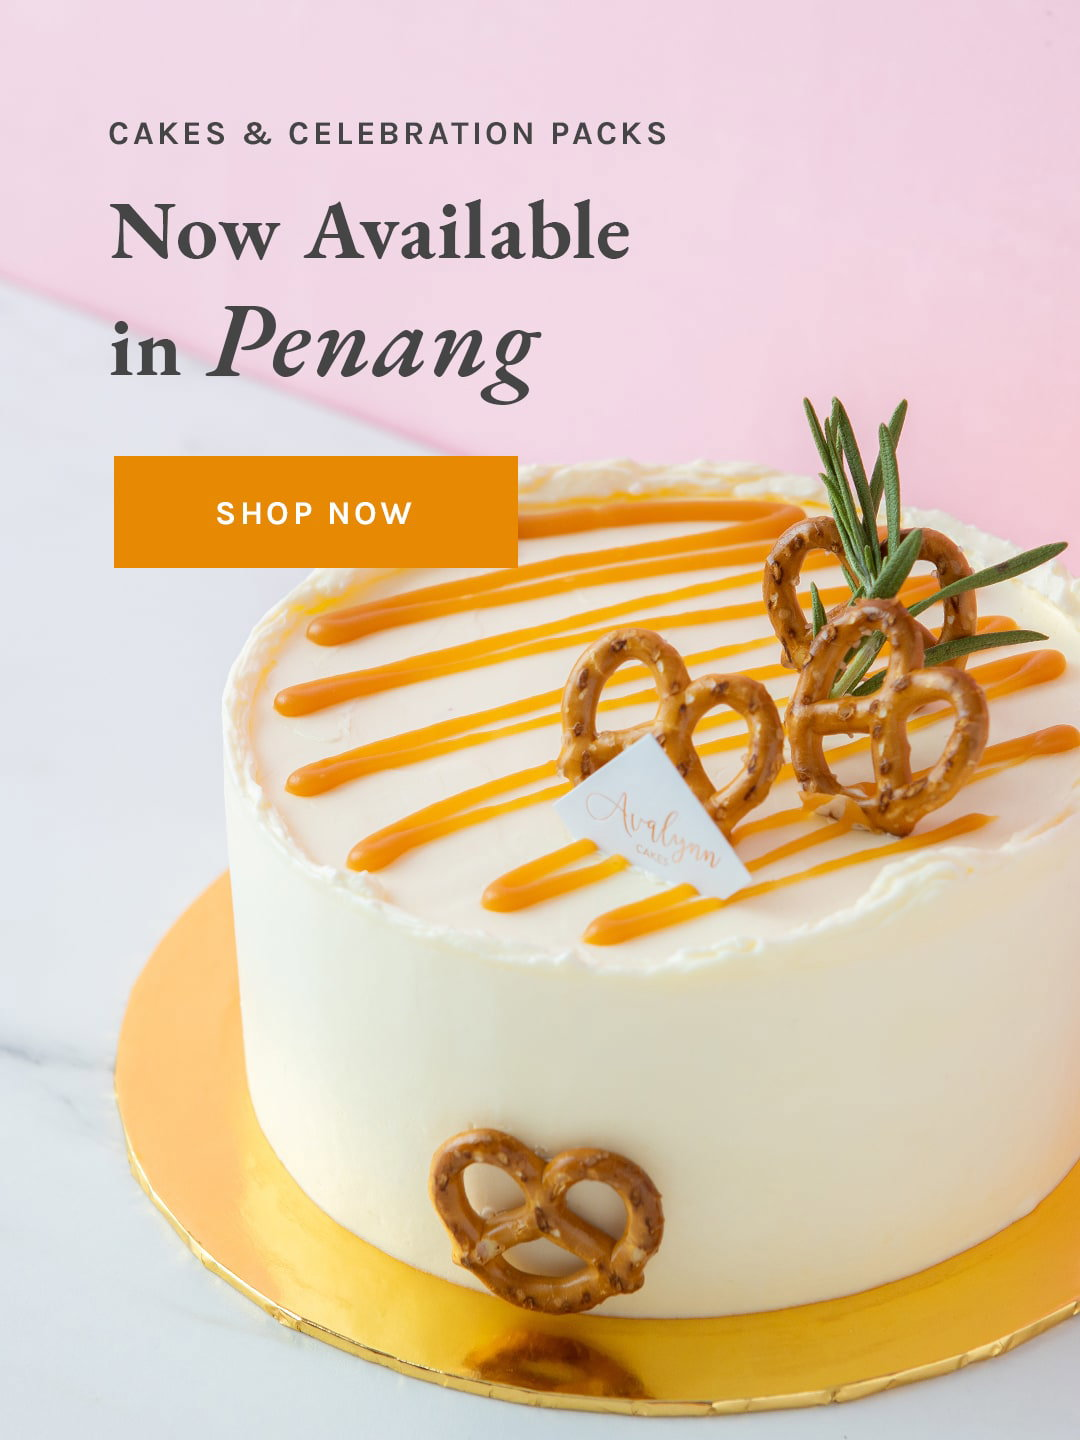 In penang shop cake 15 Places